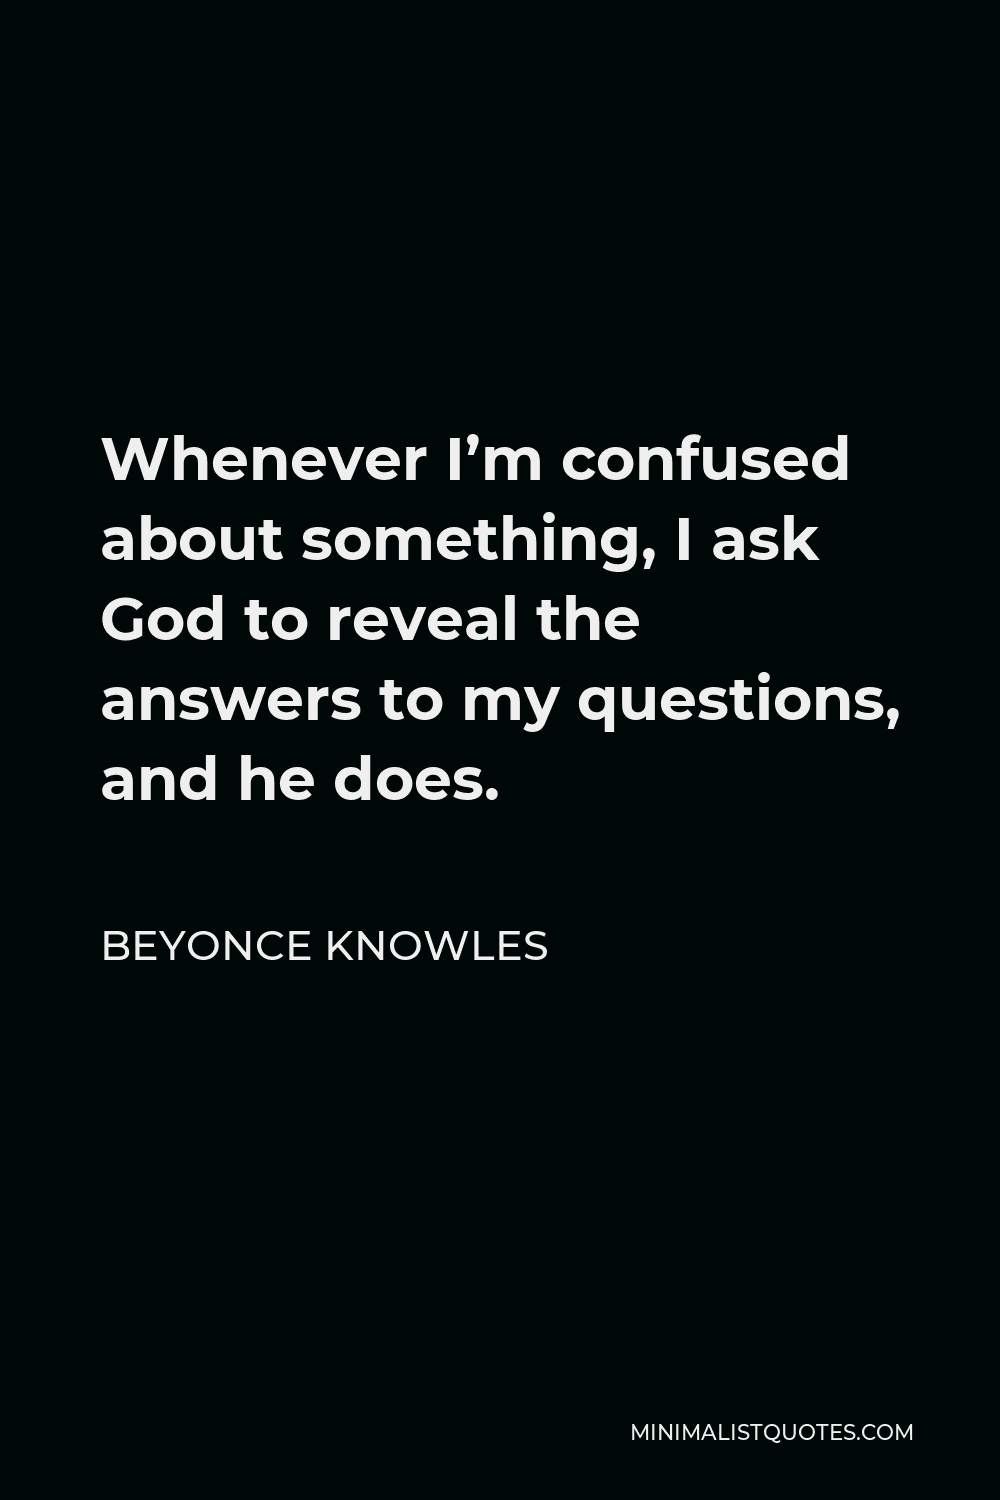 Beyonce Knowles Quote - Whenever I’m confused about something, I ask God to reveal the answers to my questions, and he does.